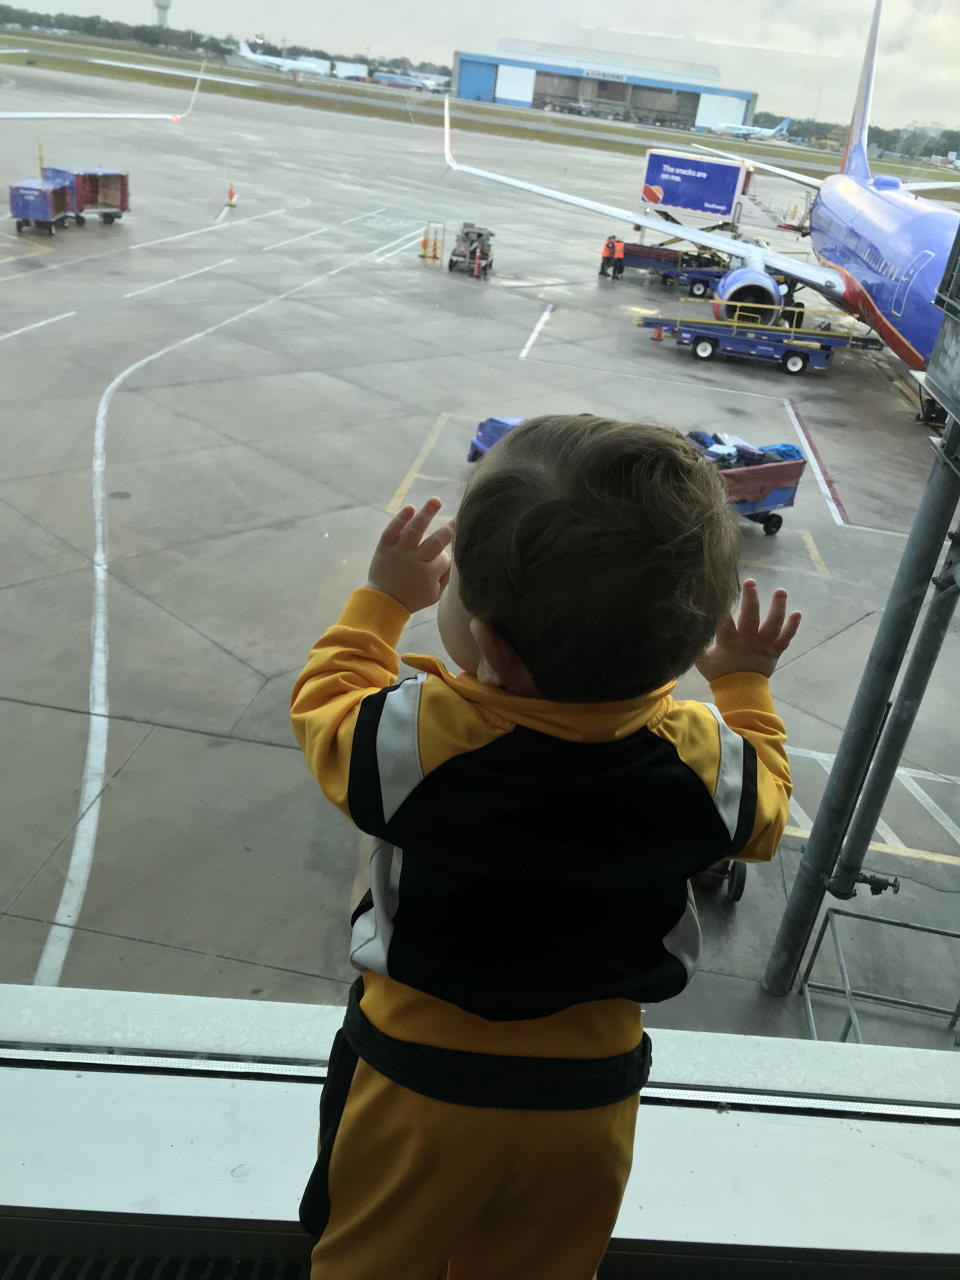 Karen Buono Johnson's 13-month-old son, looking out an airport window at all the Southwest Airlines planes not flying.  (Courtesy Karen Buono Johnson)